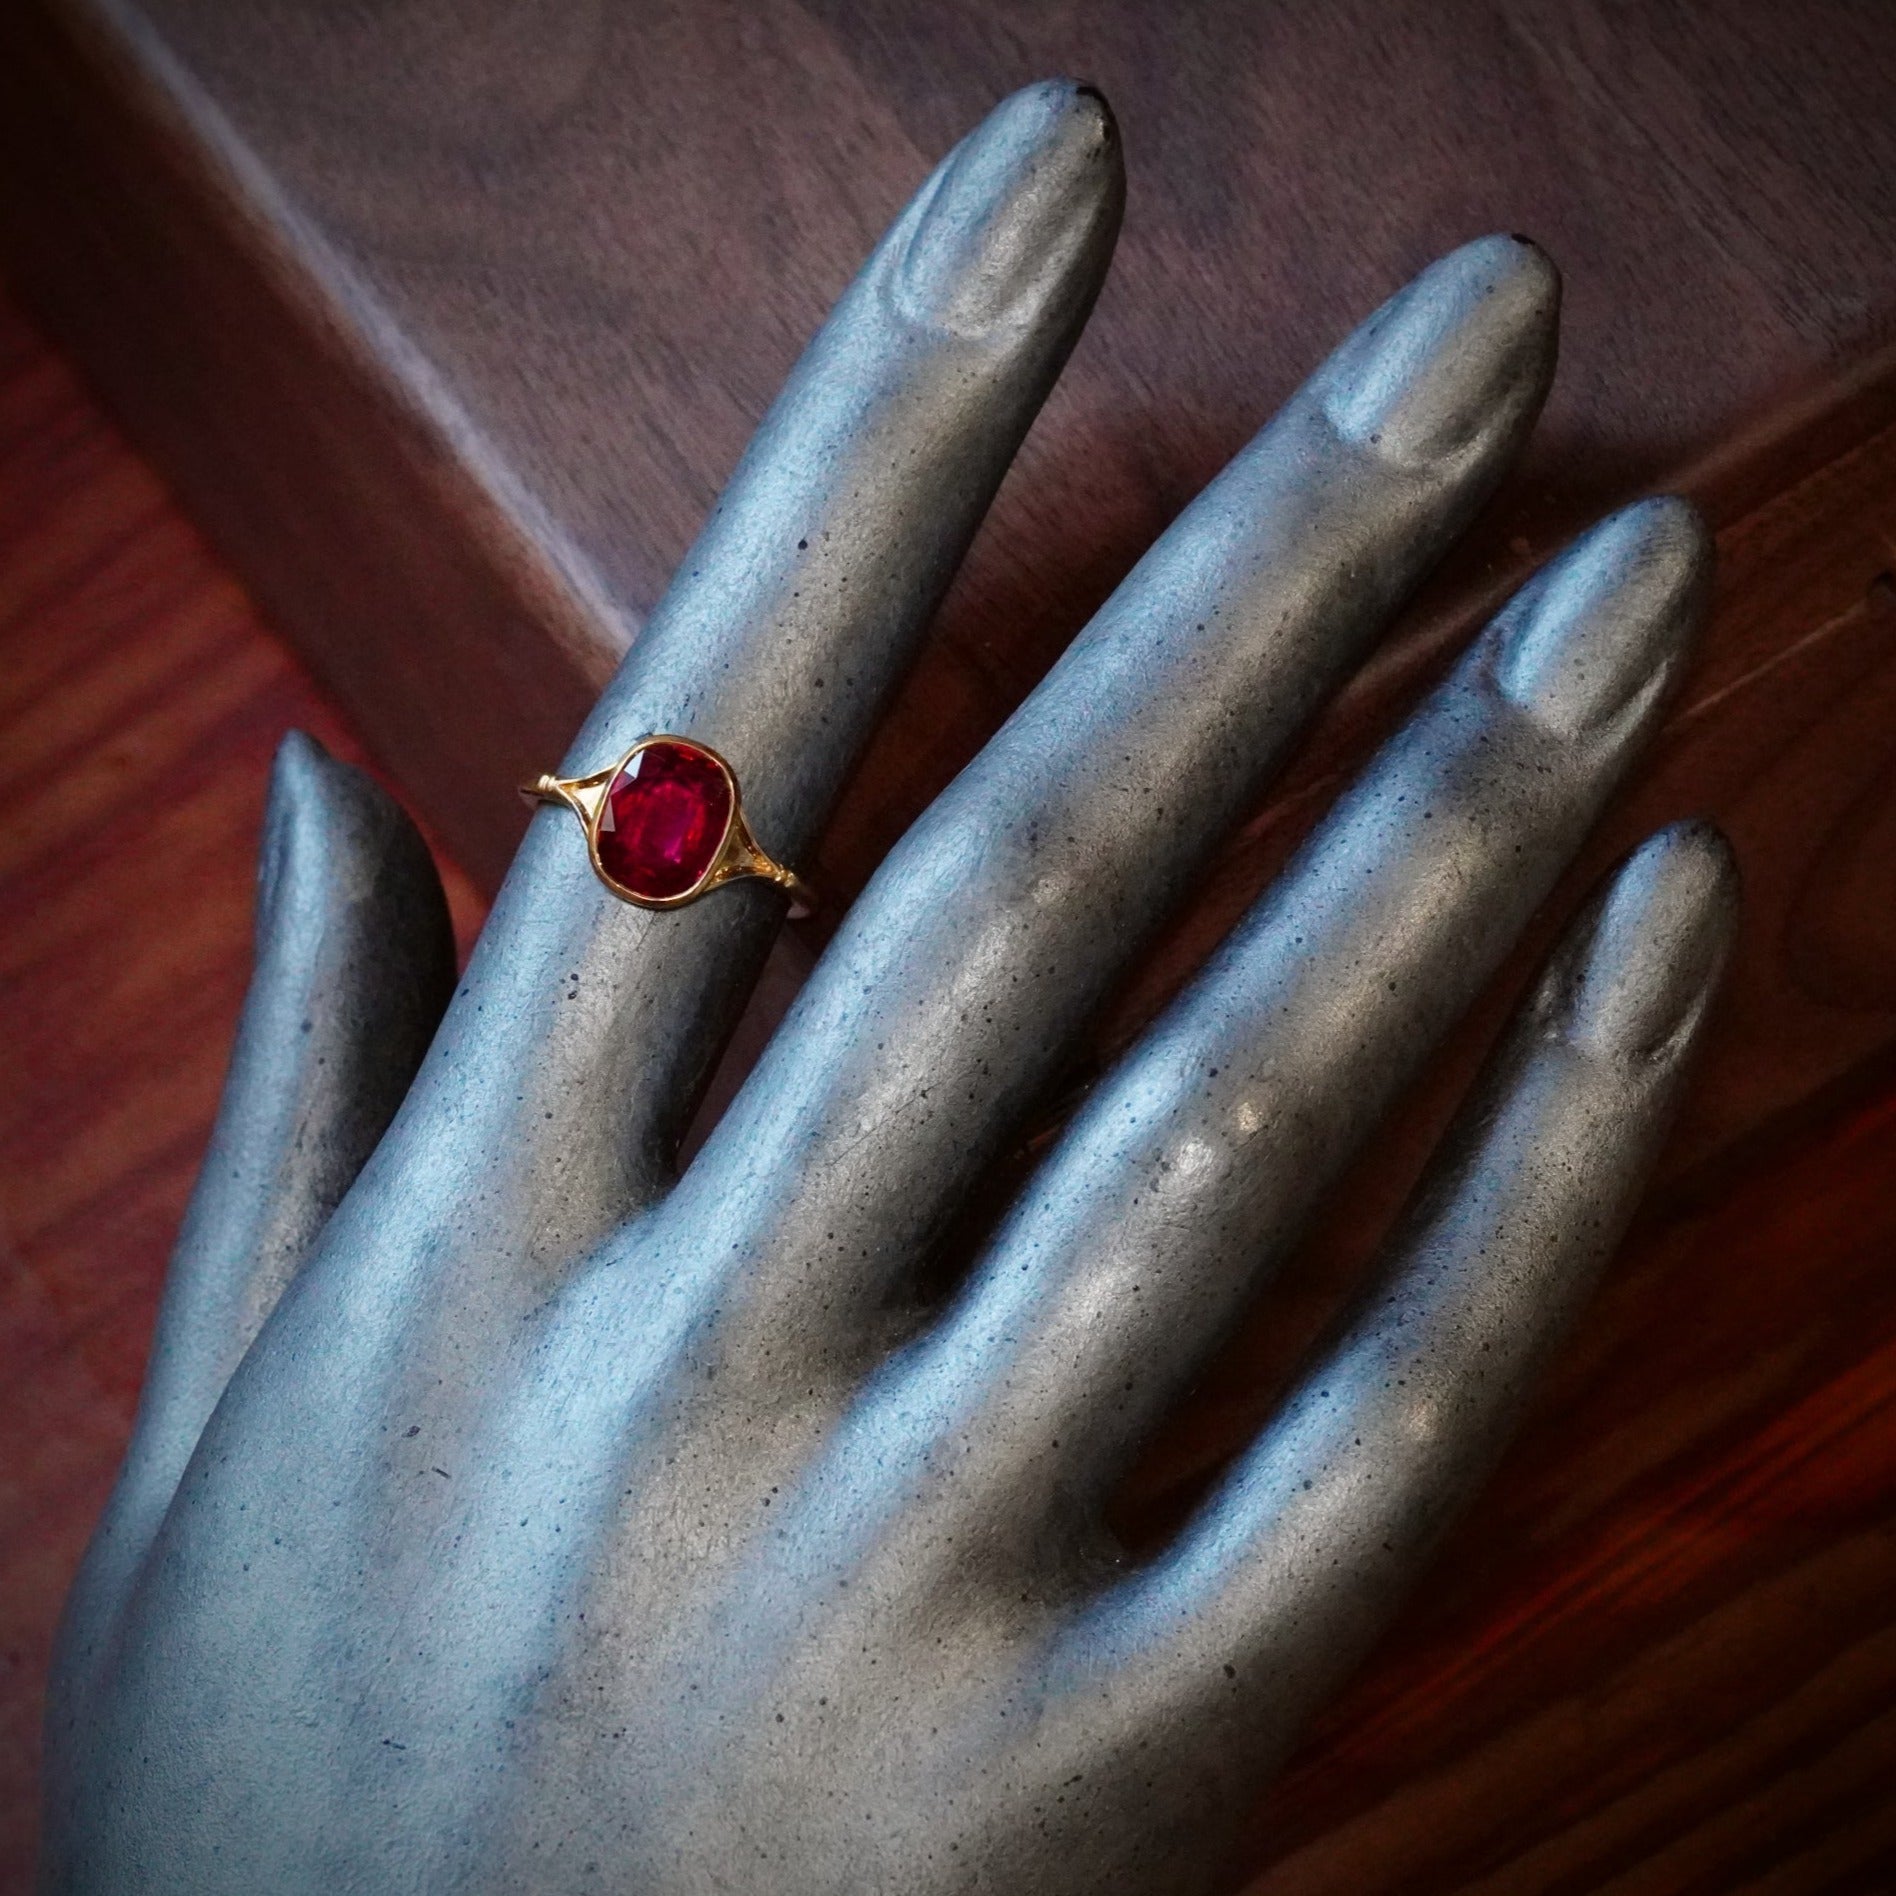  Jogani 2.75 CT Cherry-Red Spinel Ring